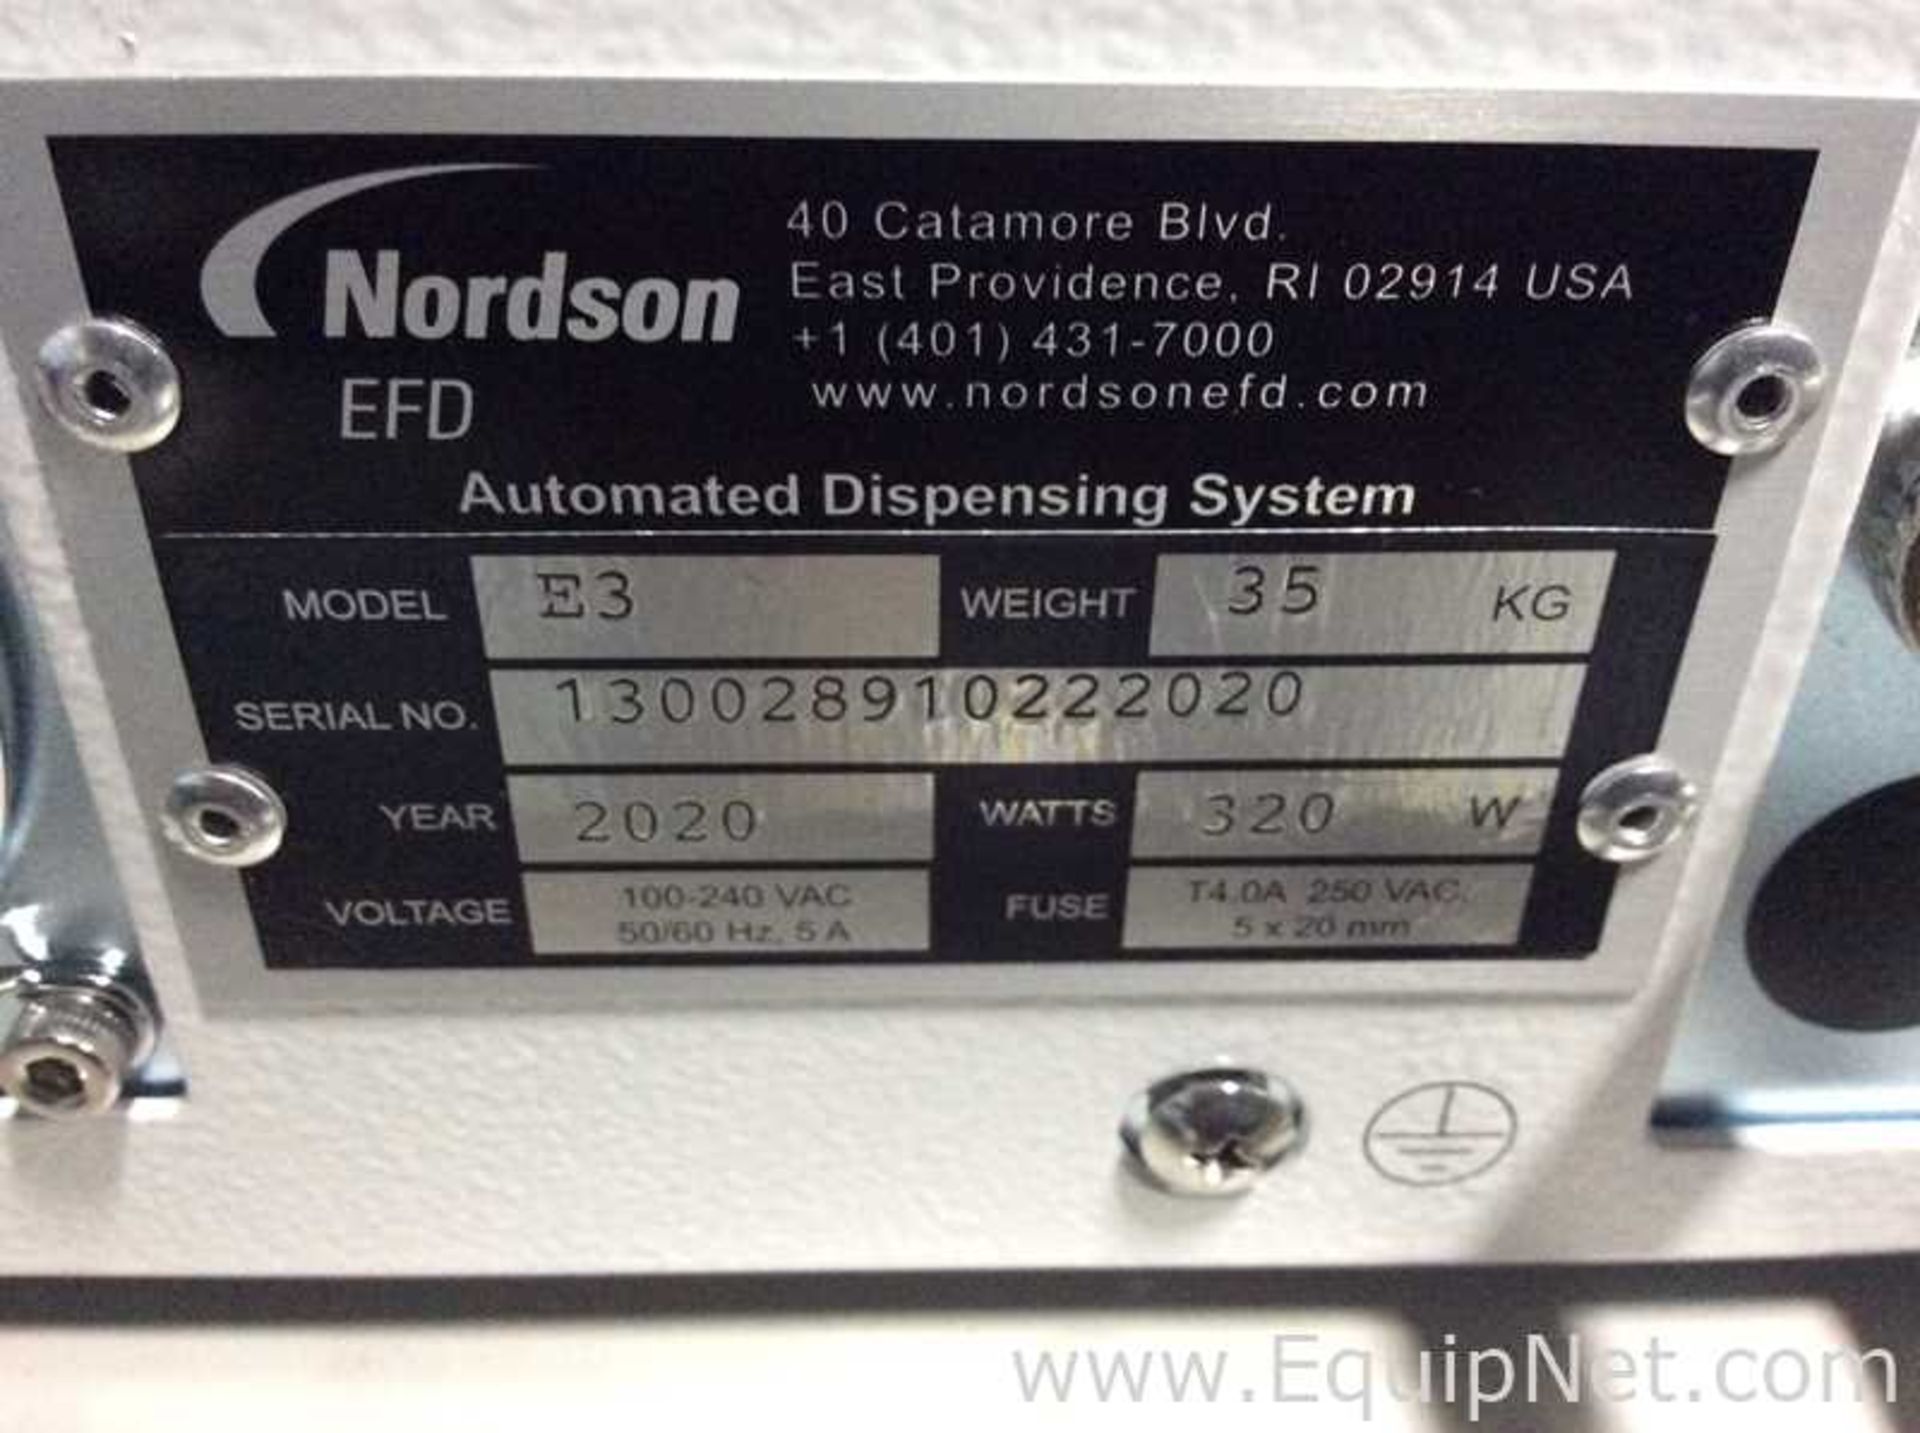 Nordson E3 Automated Fluid Dispensing Robot - Image 7 of 7